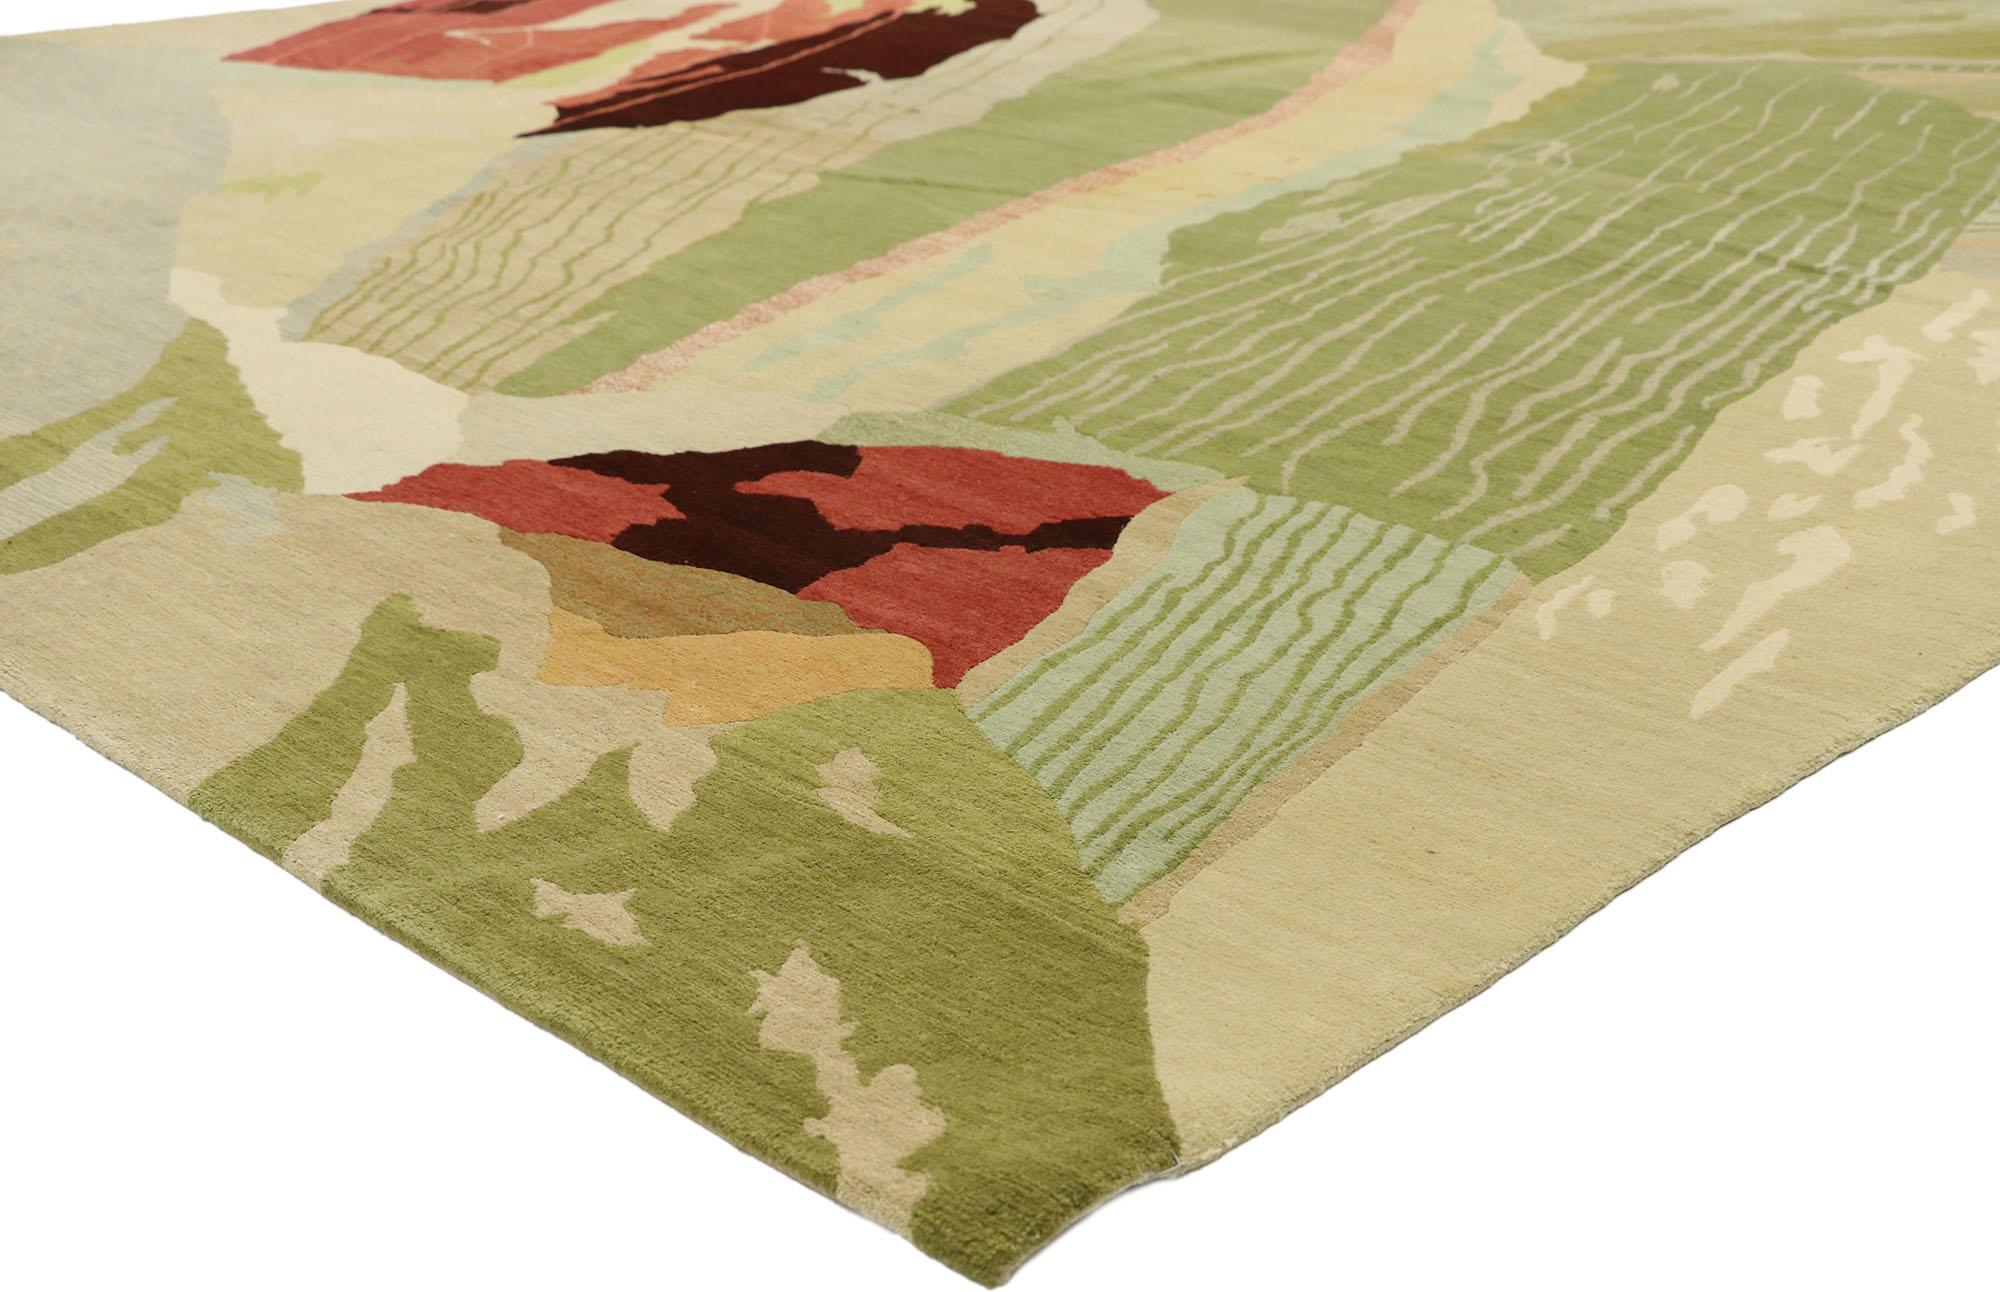 77392 Contemporary Abstract Odegard Rug Inspired by William Morris 10'02 x 13'11. This hand knotted wool Tibetan contemporary Odegard rug features an all-over pattern composed of a large scale nature inspired abstract design spread across the field